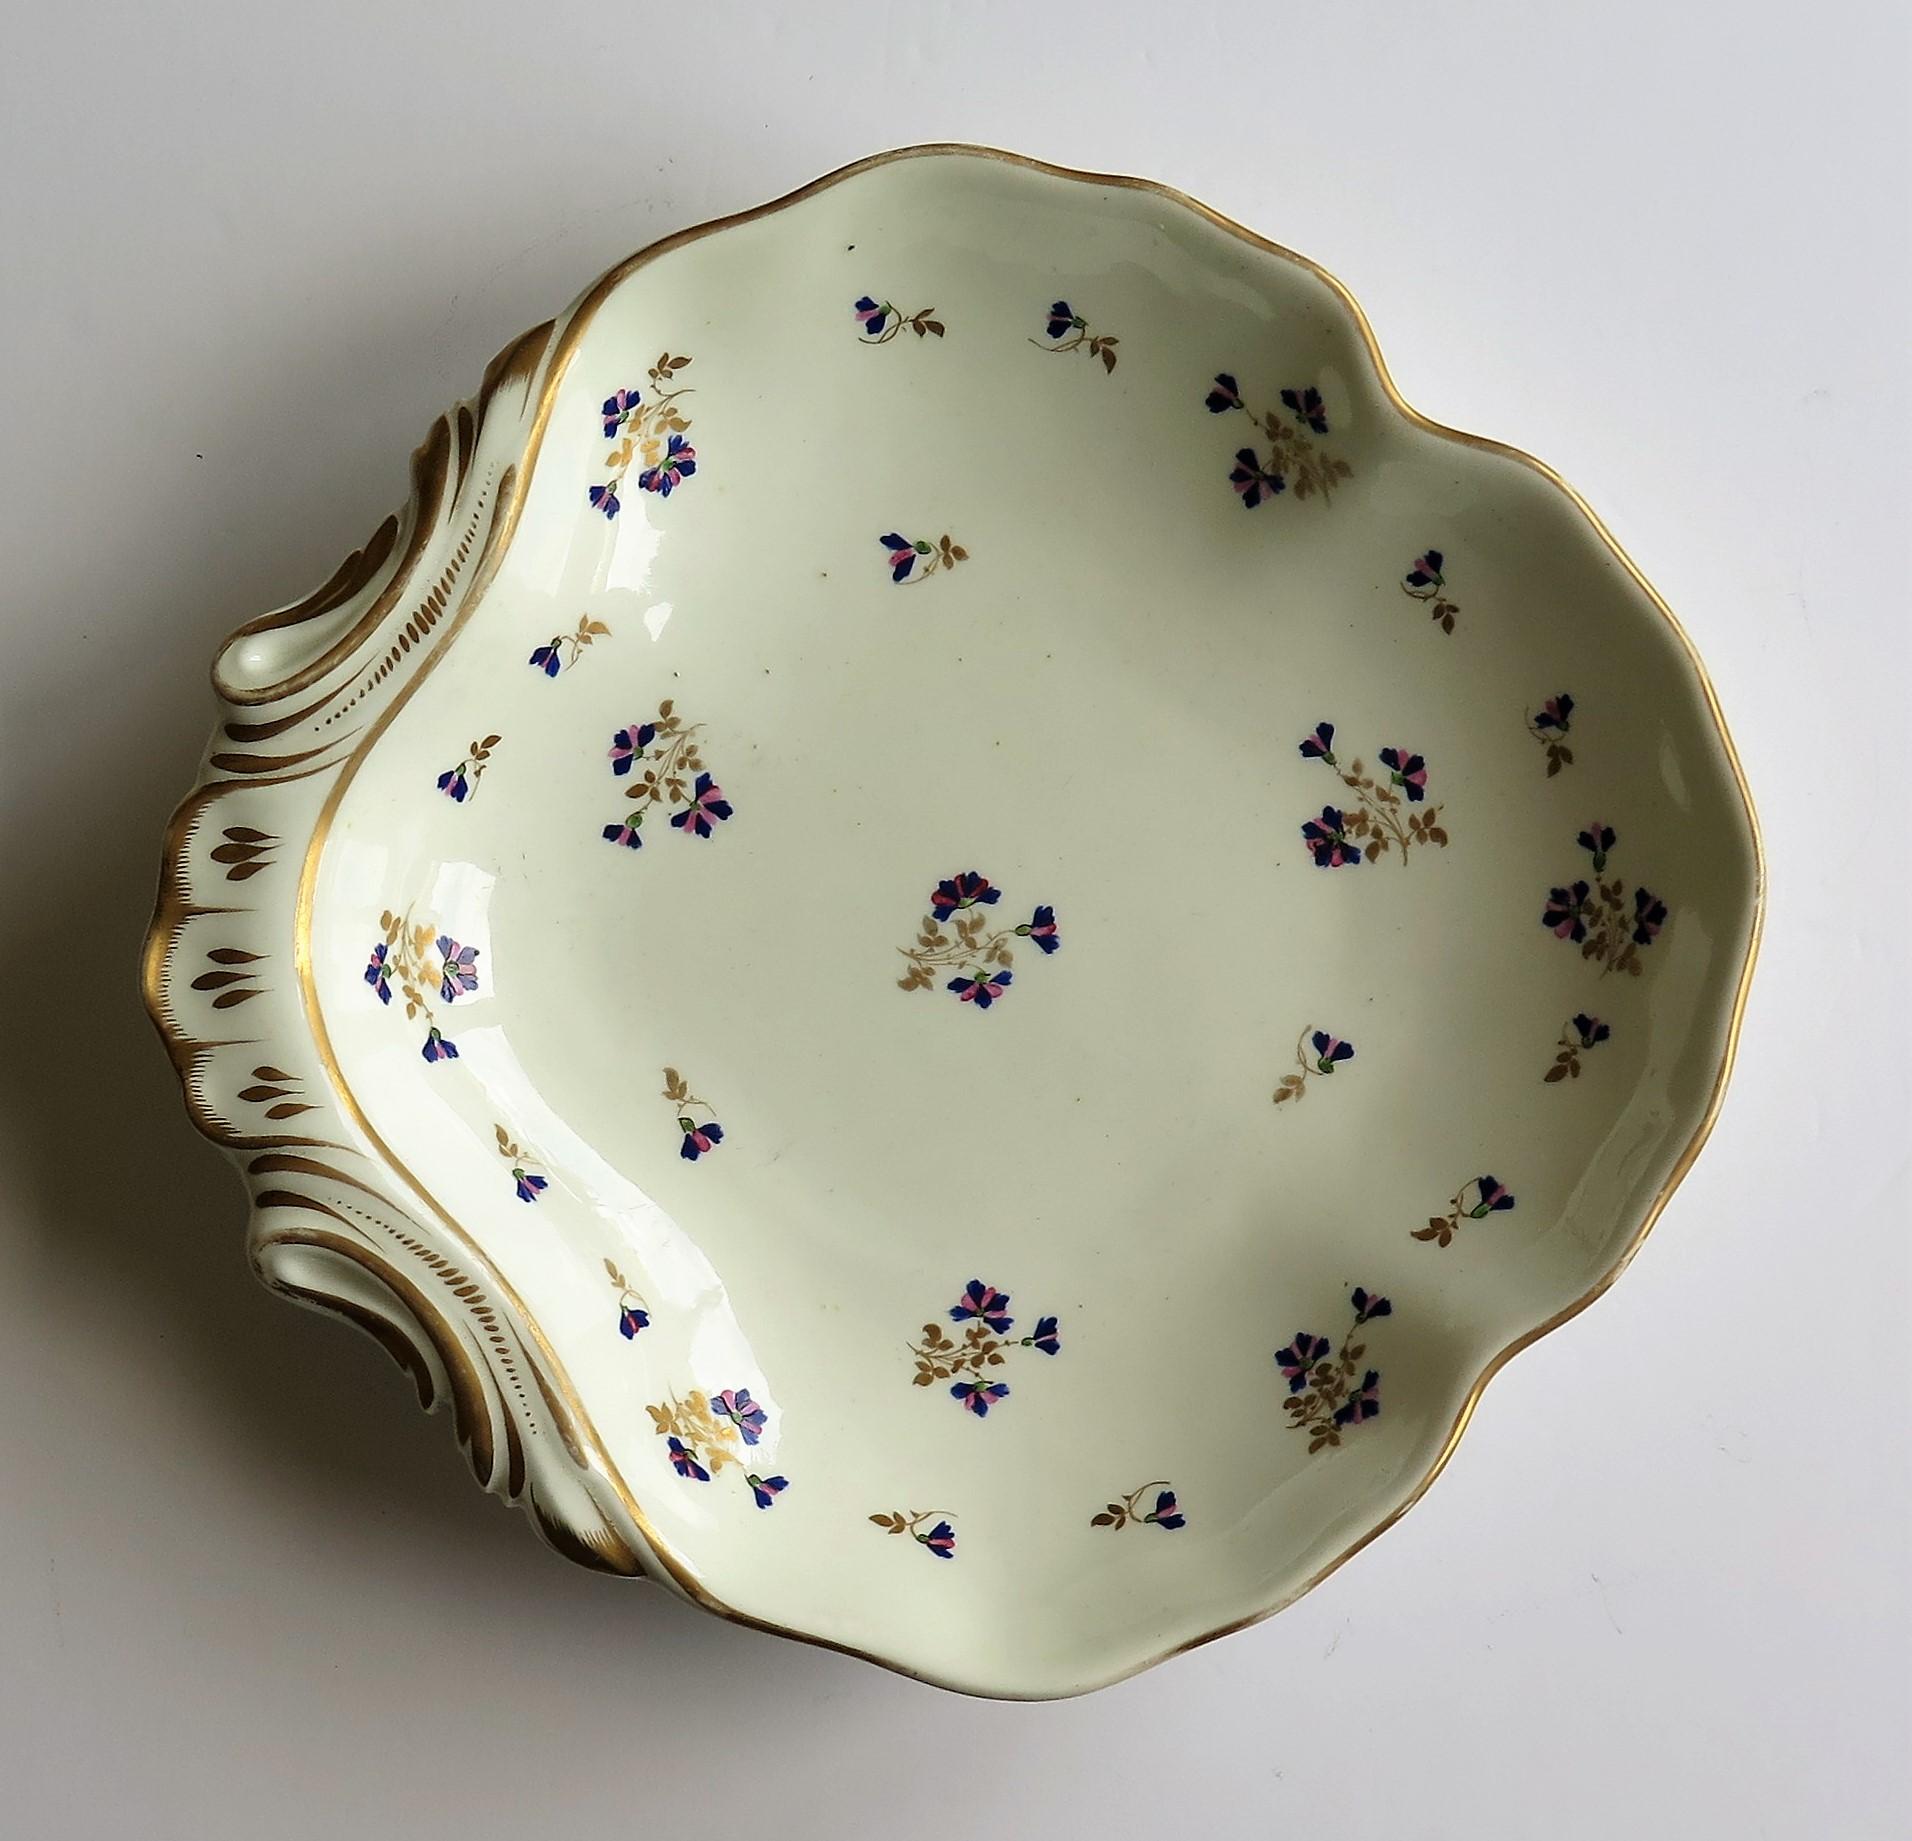 This is a beautiful porcelain shell dish or plate hand painted and gilded in pattern 129, made by the Derby factory, in the reign of George 111 in the early 19th century, circa 1810.
 
Shell dishes, named as such for taking the shape of a shell were